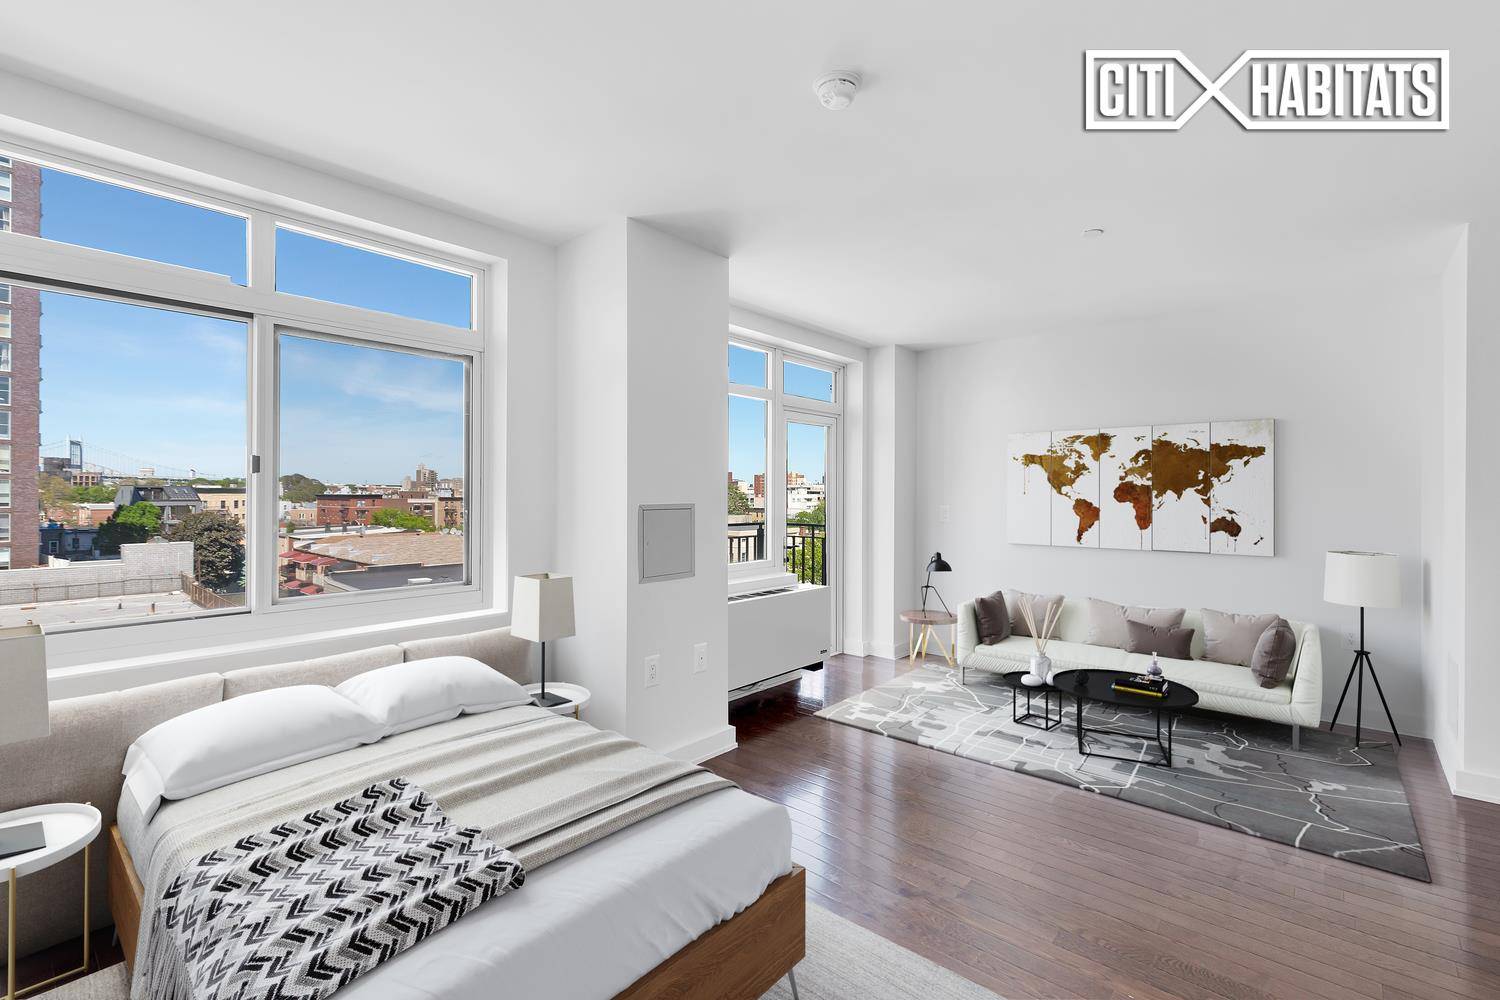 This spectacular and massive alcove studio with eat in kitchen and living space plus a gorgeous private 200 square foot terrace is larger than most 1 bedroom apartments.